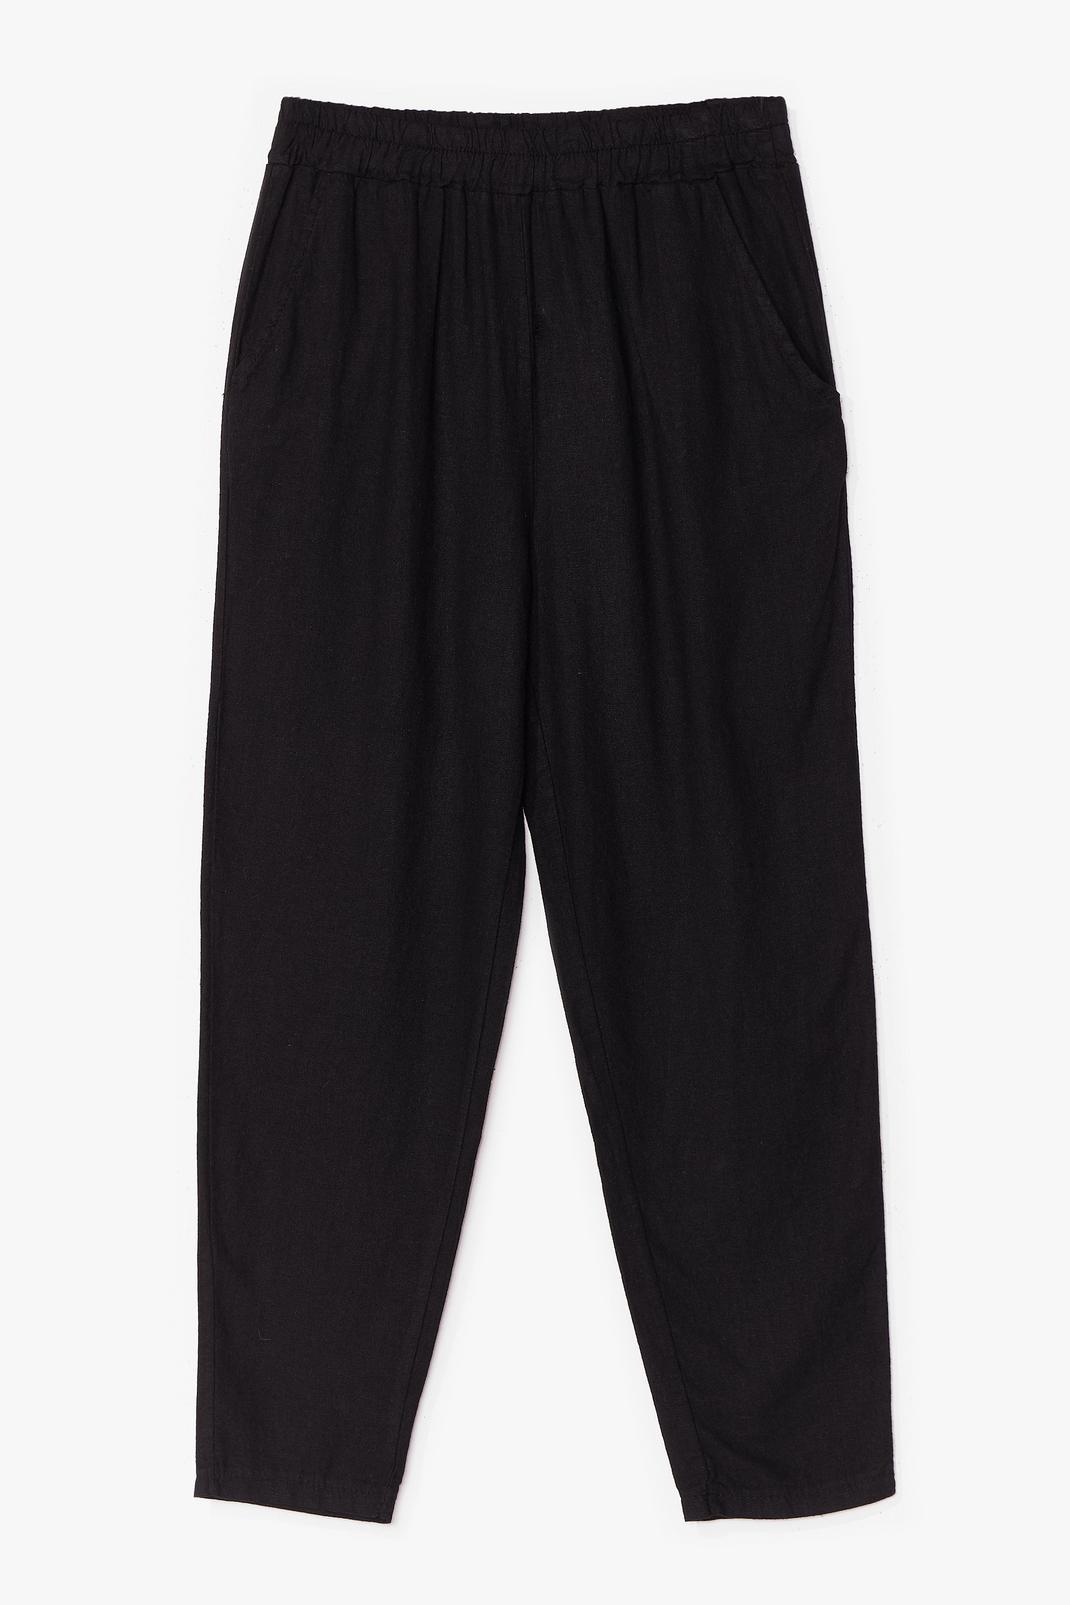 Black Linen Tapered High Waisted Pants image number 1